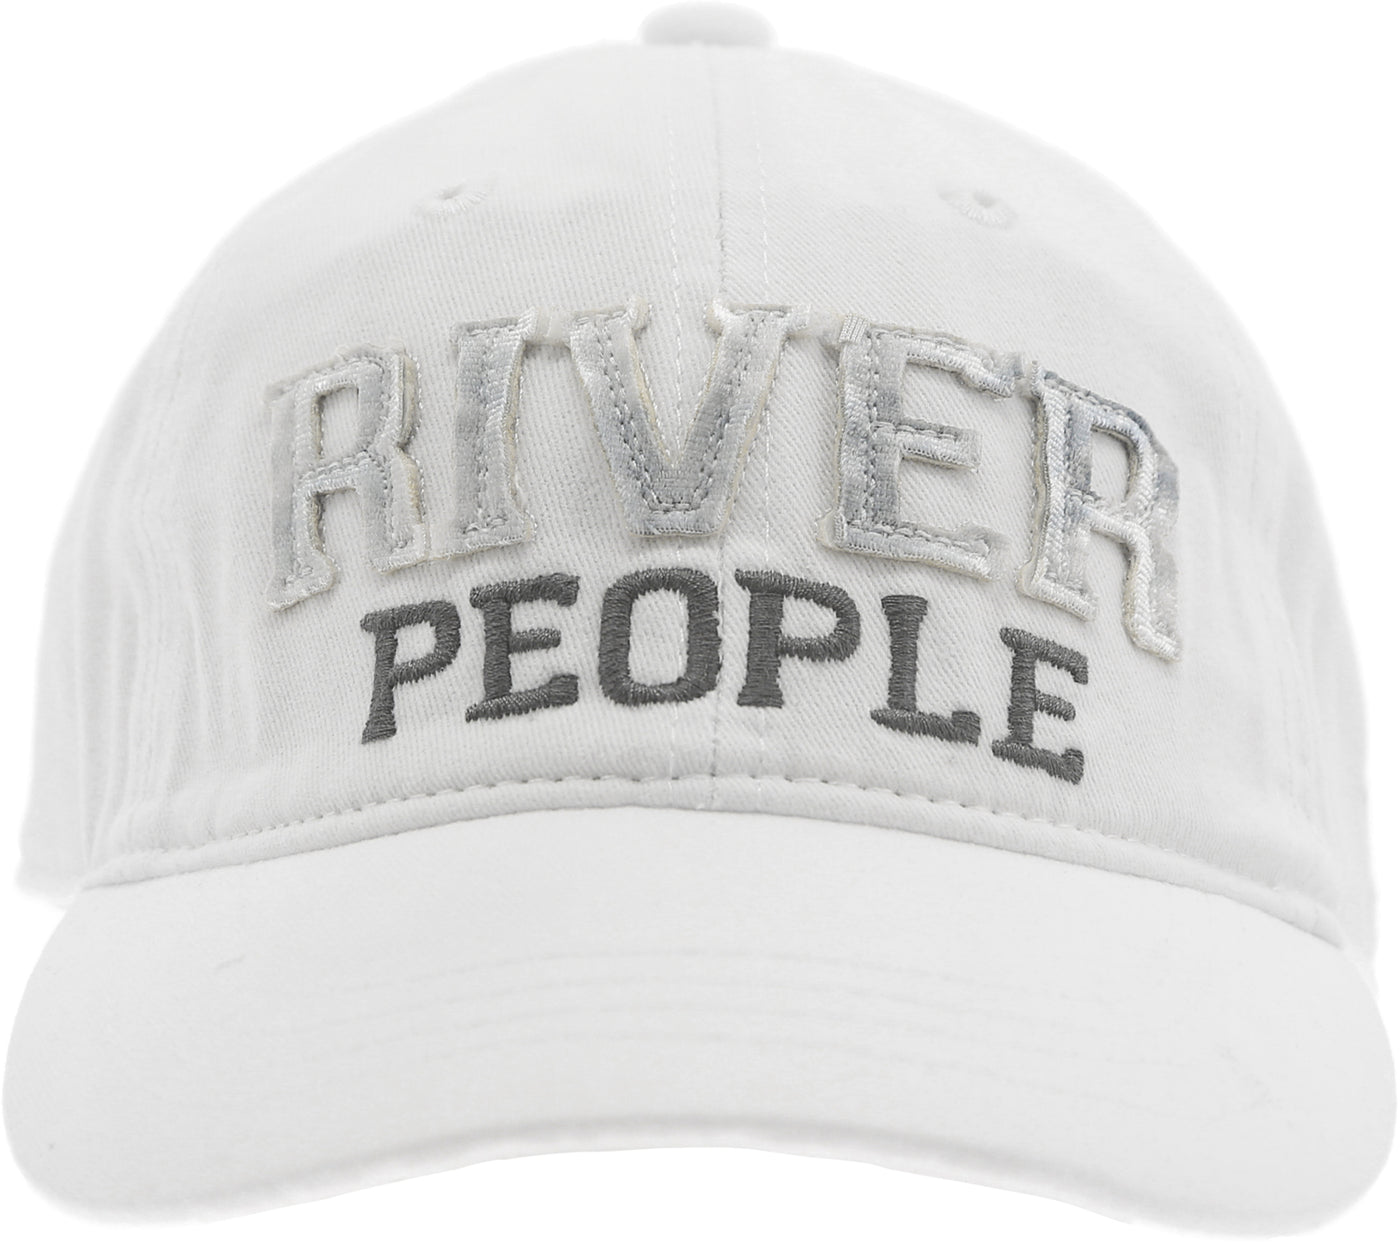 River People White or Gray Adjustable Hat